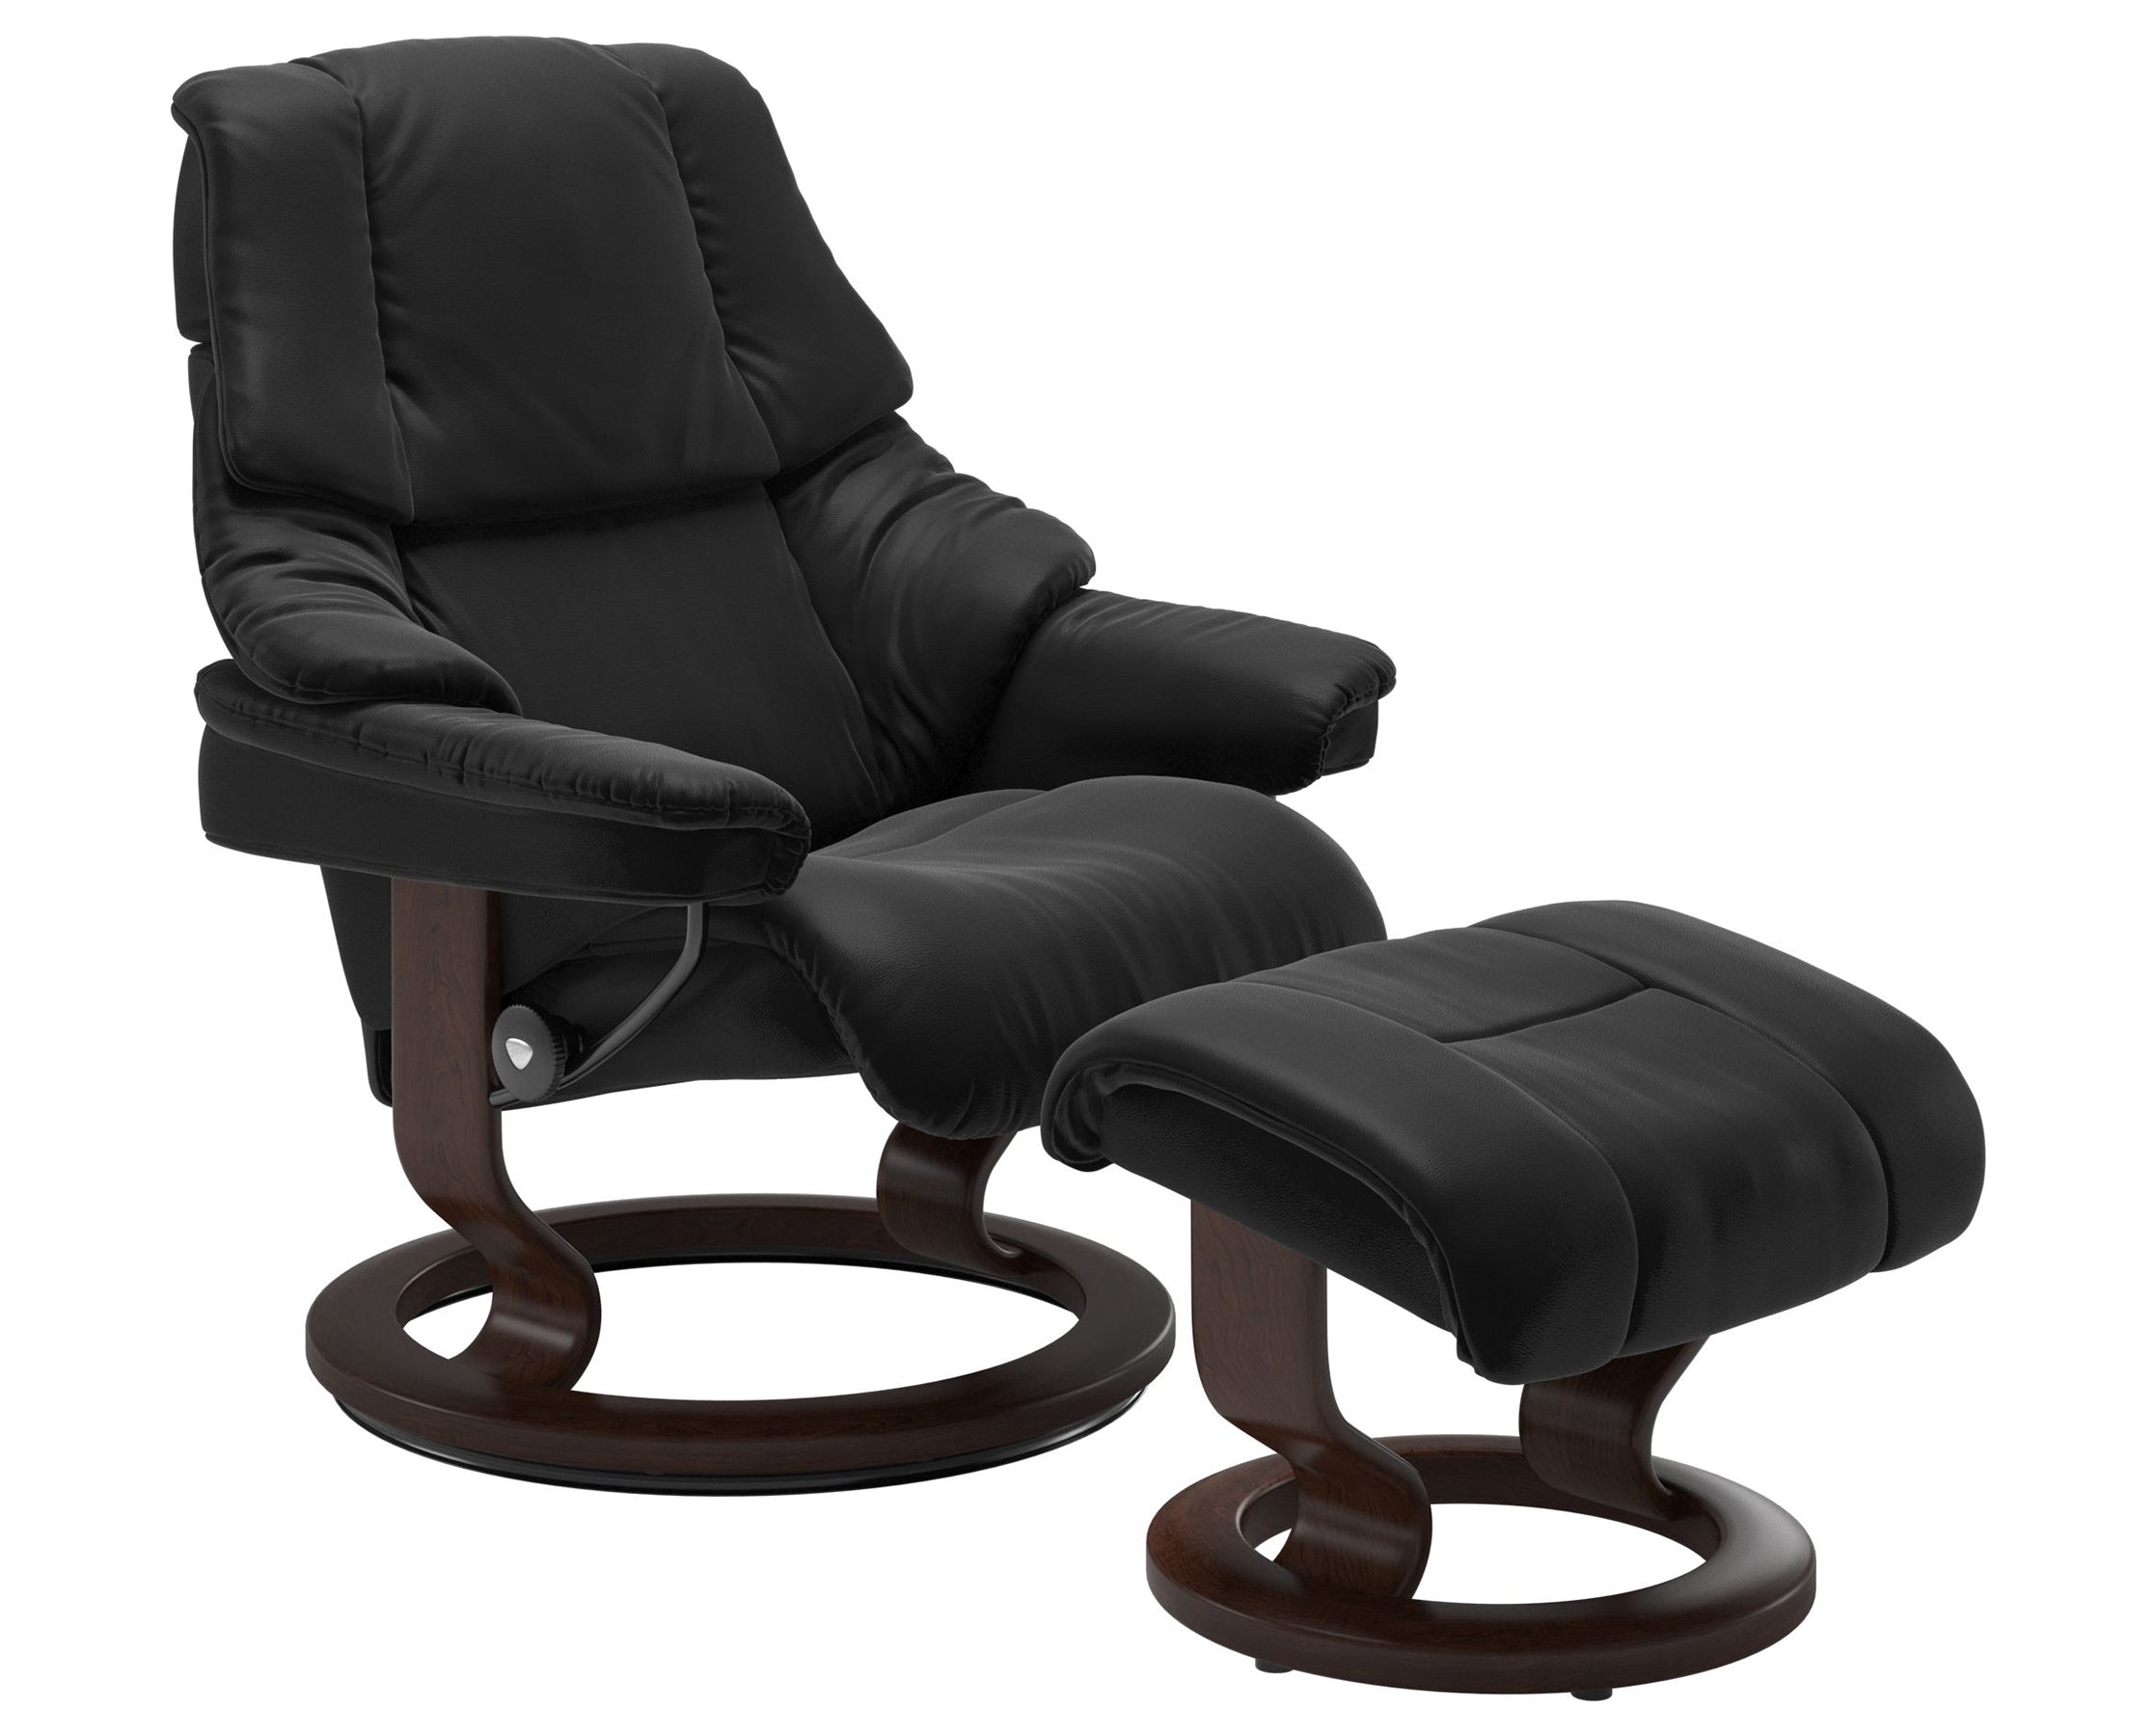 Paloma Leather Black S/M/L and Brown Base | Stressless Reno Classic Recliner | Valley Ridge Furniture